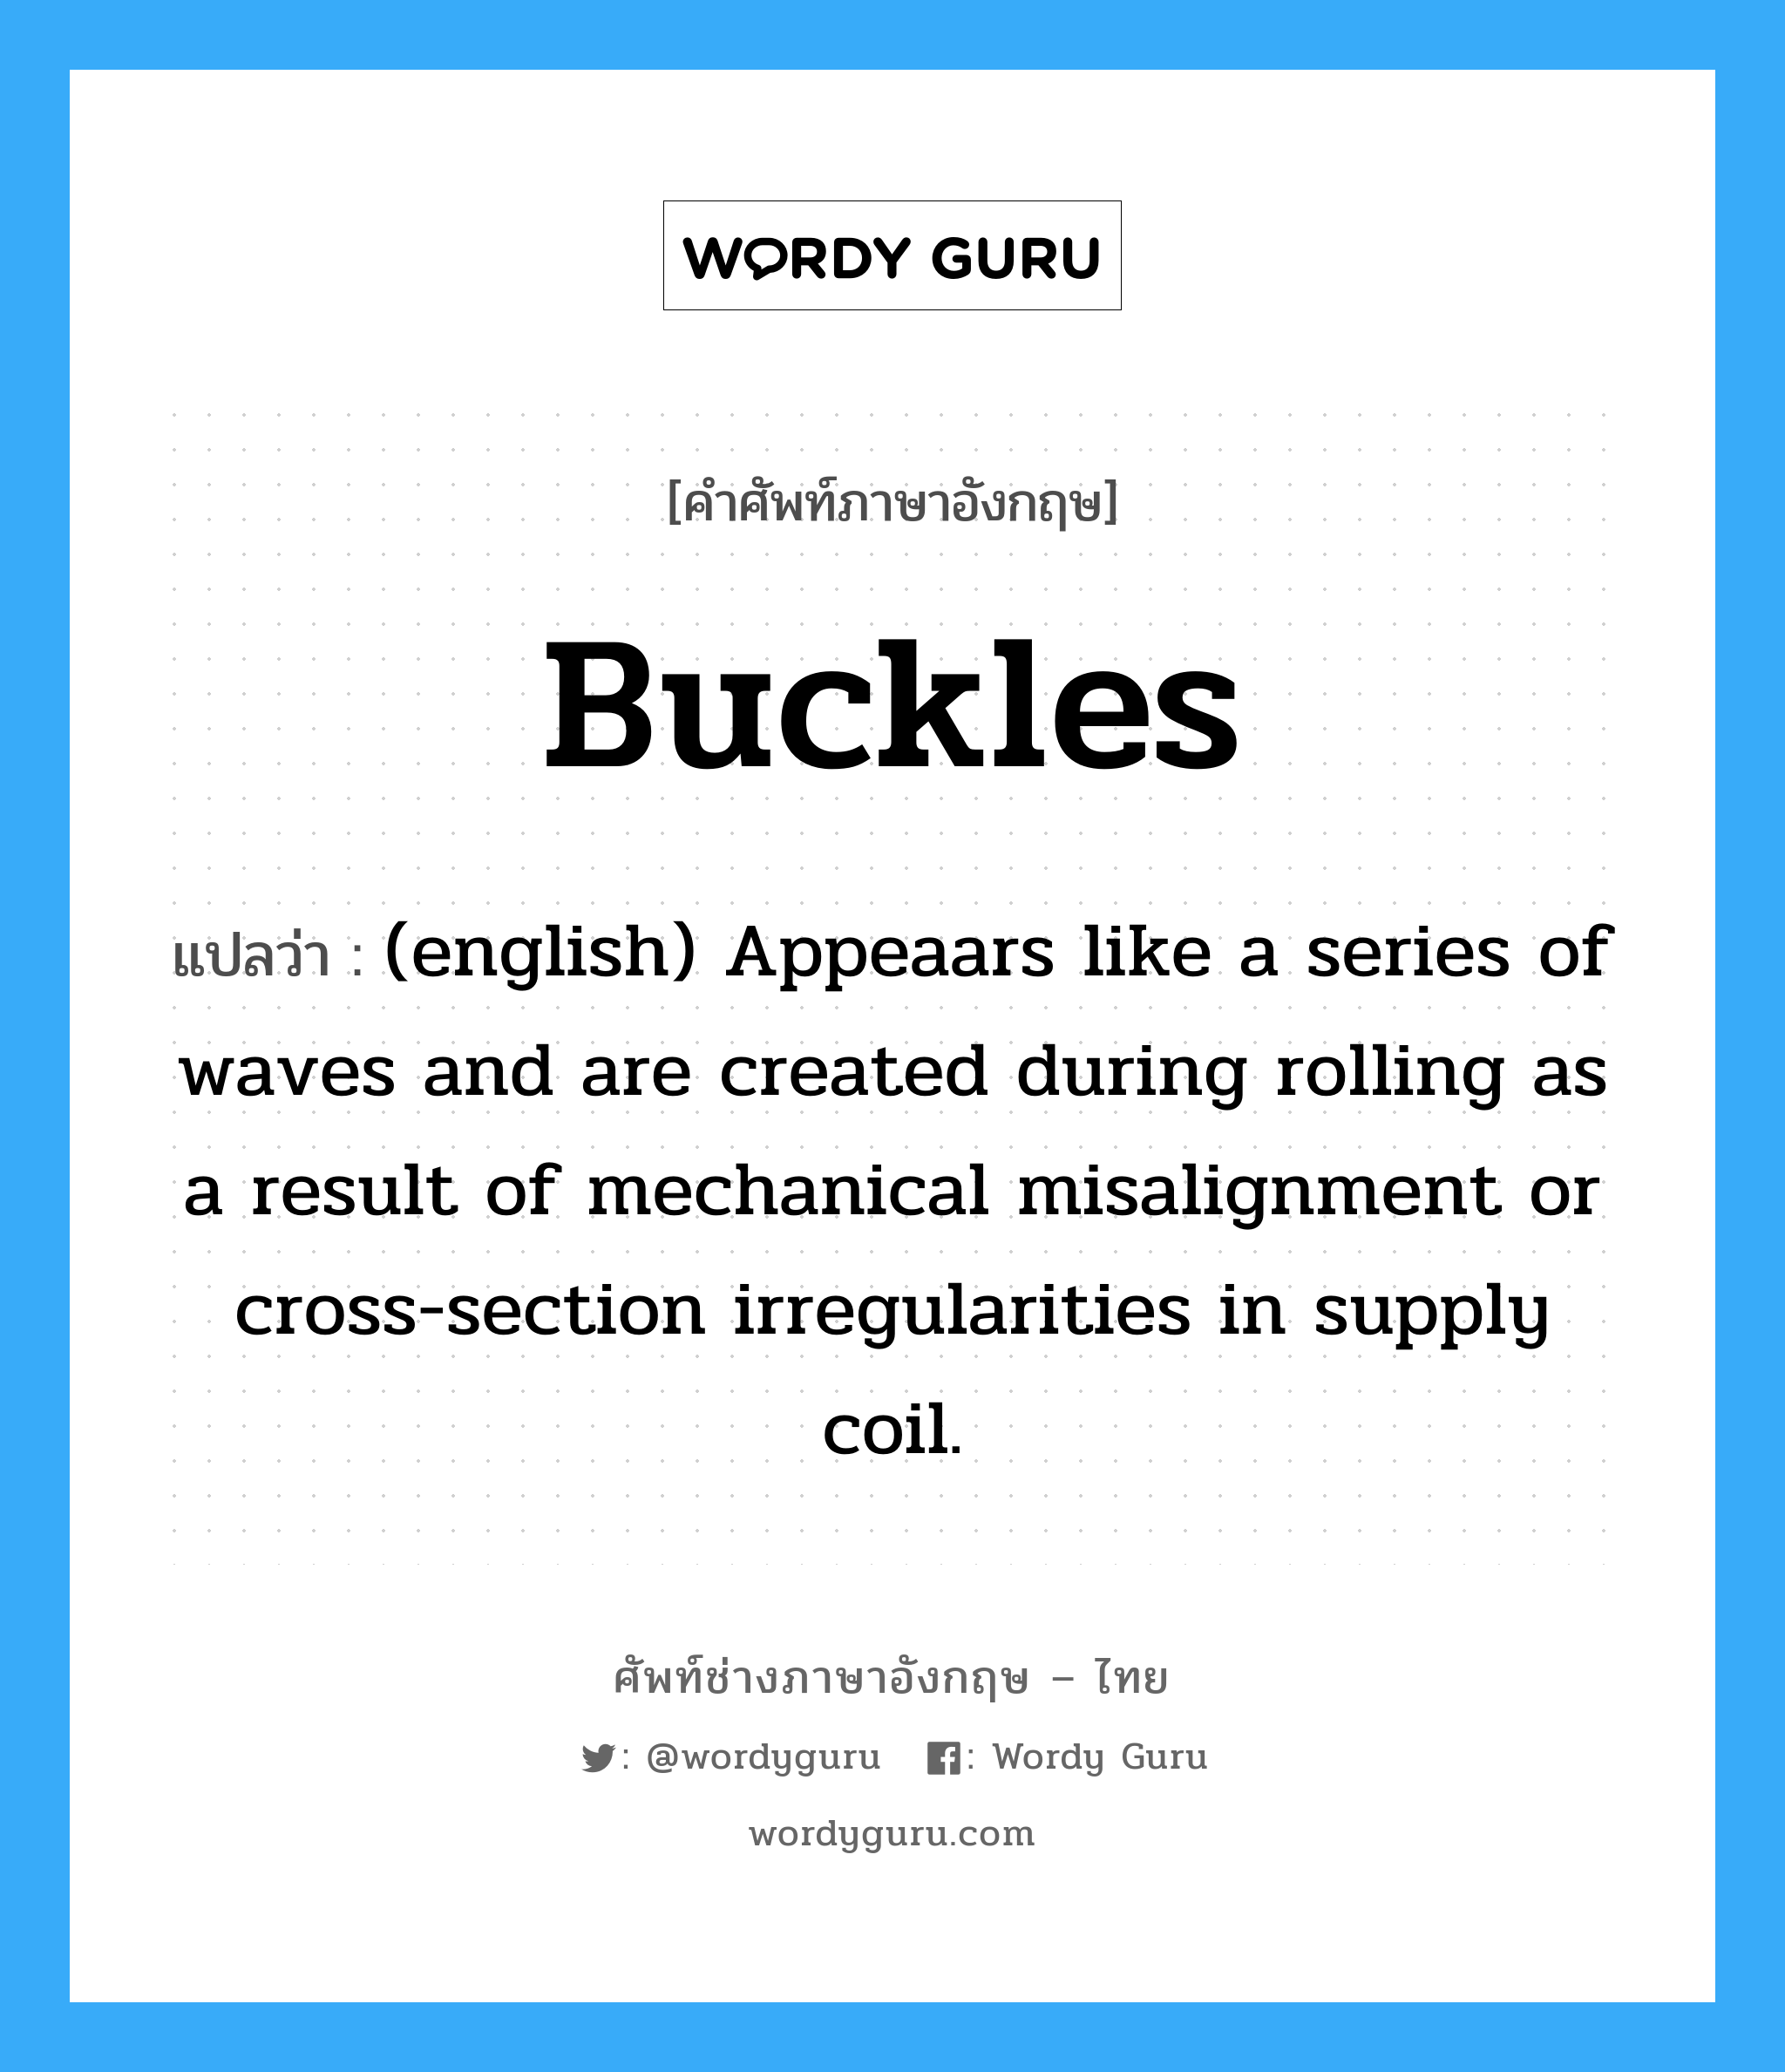 Buckles แปลว่า?, คำศัพท์ช่างภาษาอังกฤษ - ไทย Buckles คำศัพท์ภาษาอังกฤษ Buckles แปลว่า (english) Appeaars like a series of waves and are created during rolling as a result of mechanical misalignment or cross-section irregularities in supply coil.